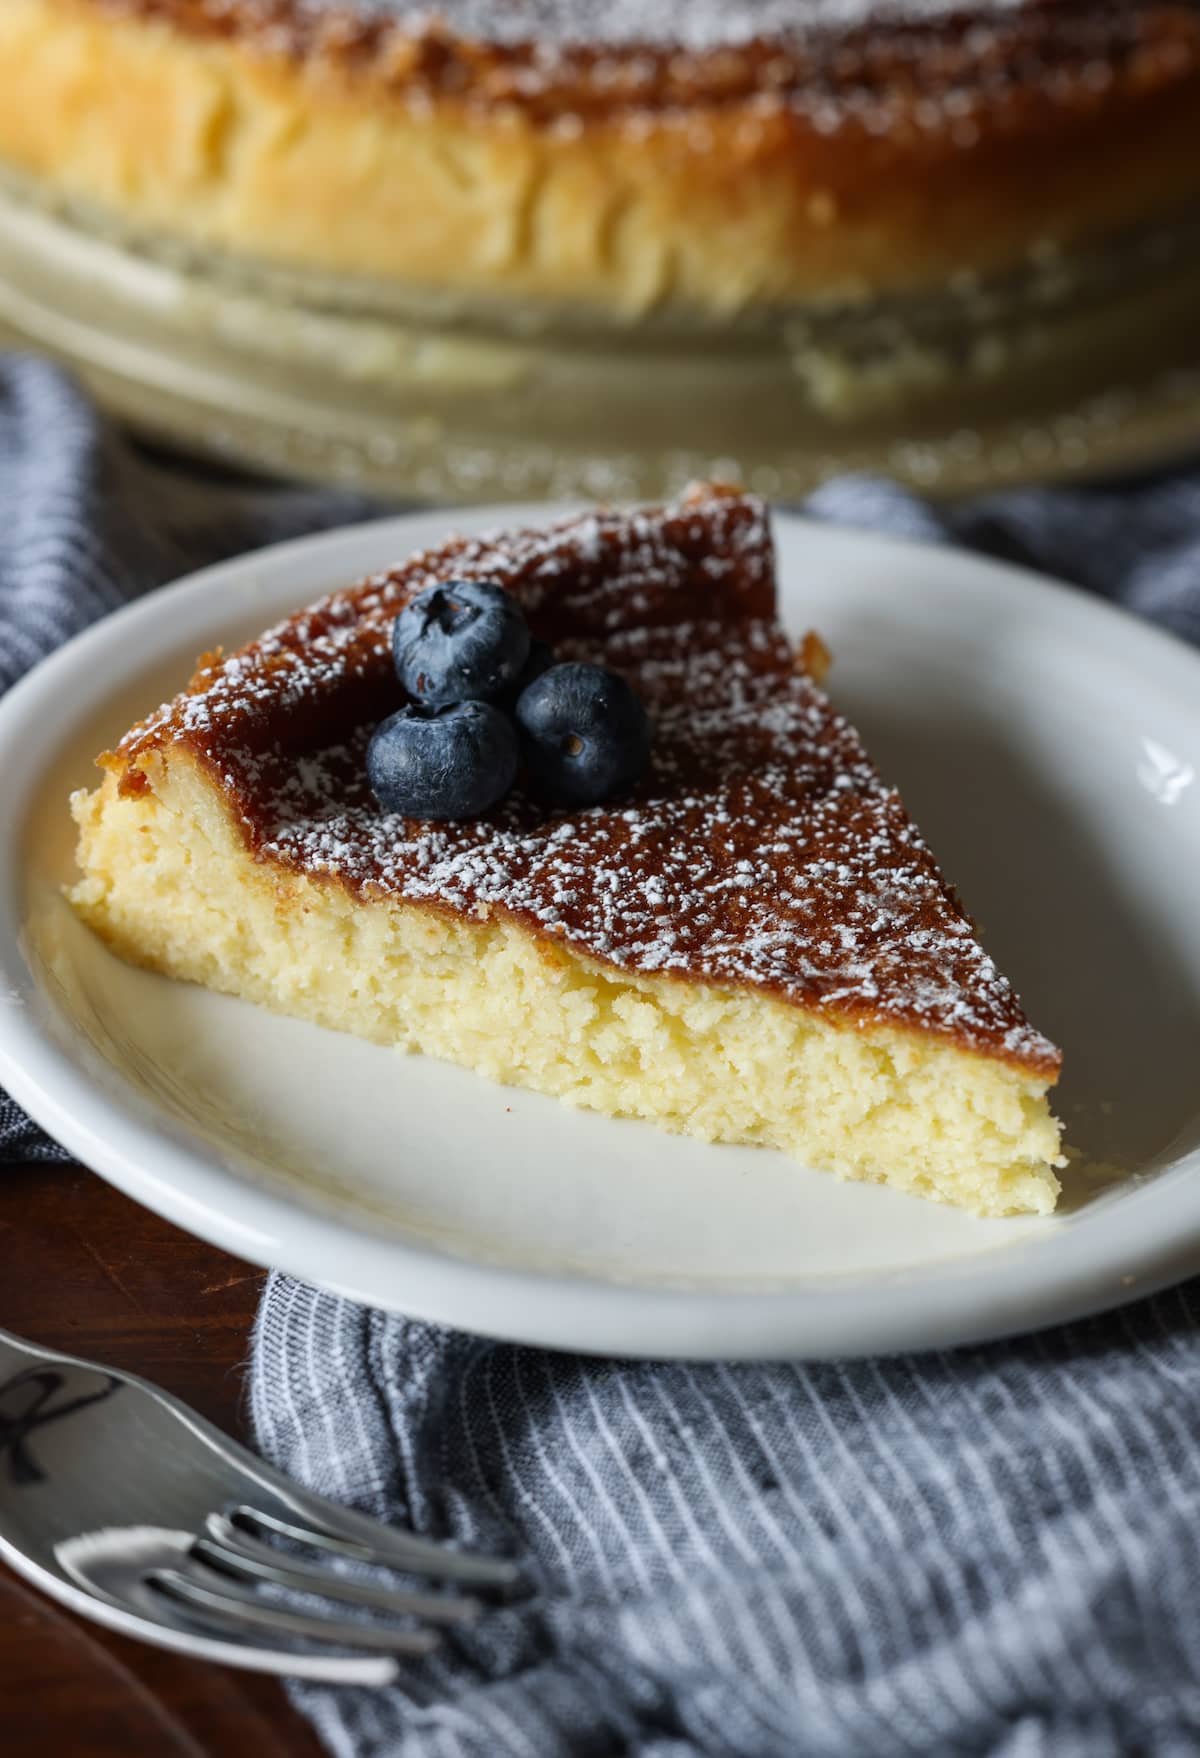 A slice of flourless white chocolate cake on a white plate dusted with powdered sugar and topped with fresh blueberries, with the rest of the cake in the background.